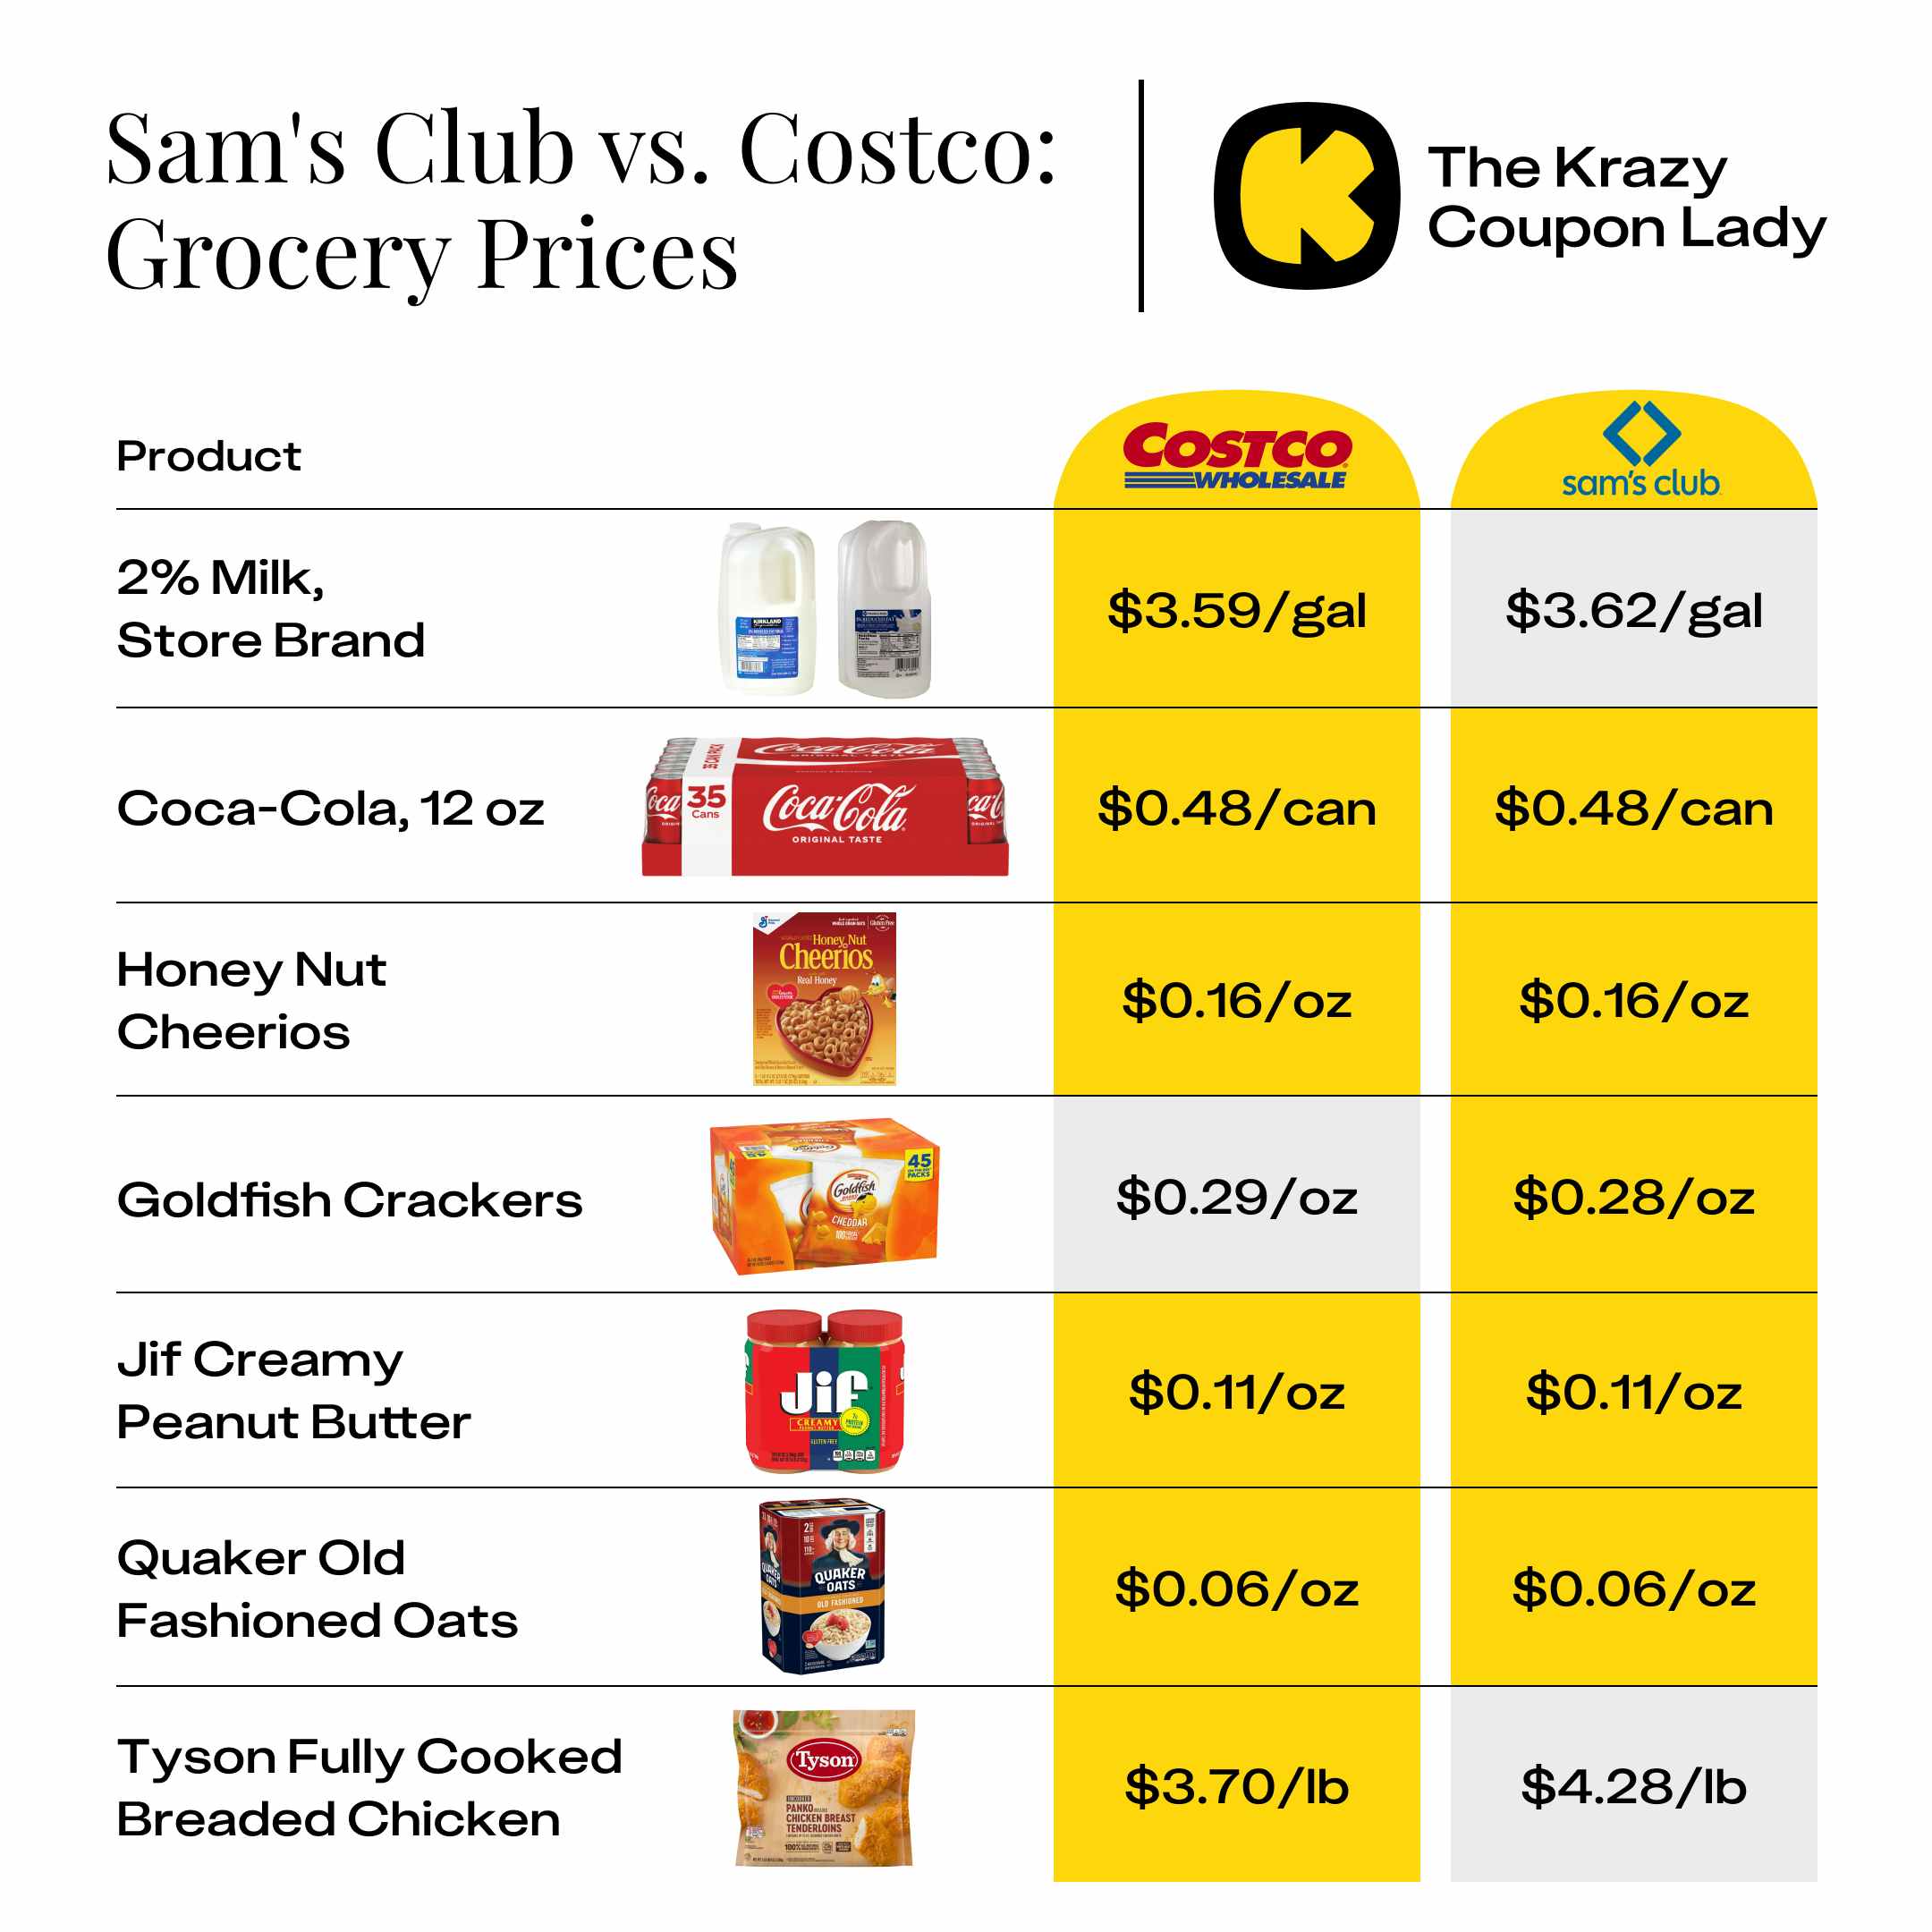 A comparison of Sam's Club vs Costco for grocery prices, showing that they tie for many, but Costco has cheaper milk and frozen chicken.